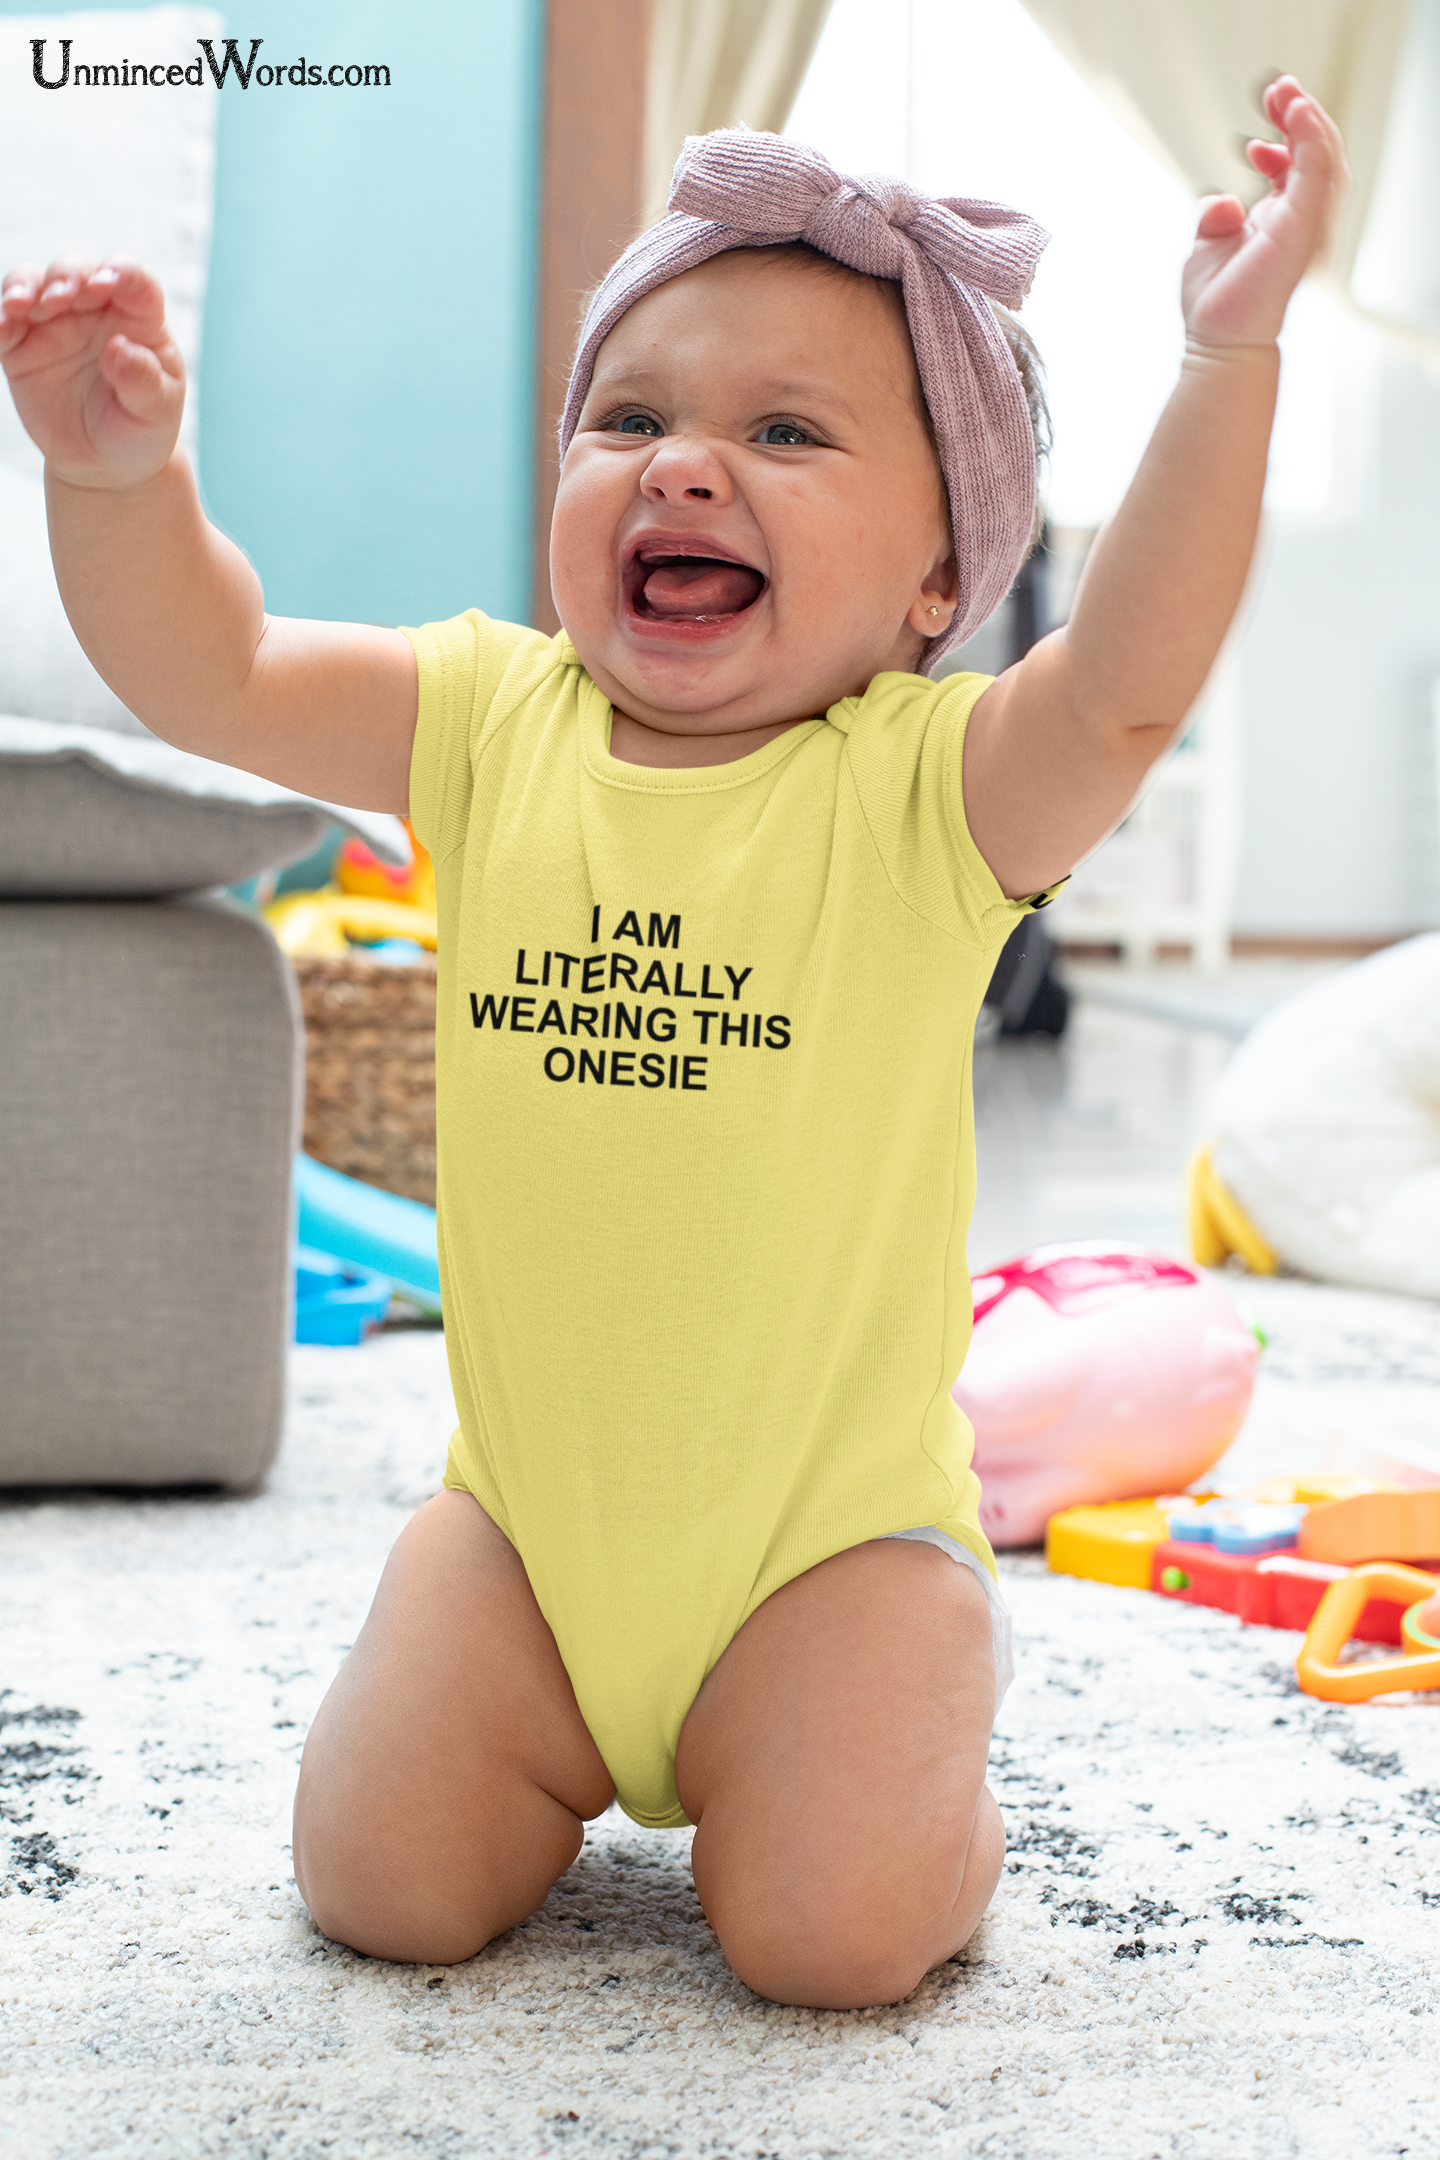 Cute Onesies says, "I am Literally Wearing This Onesie" on it.